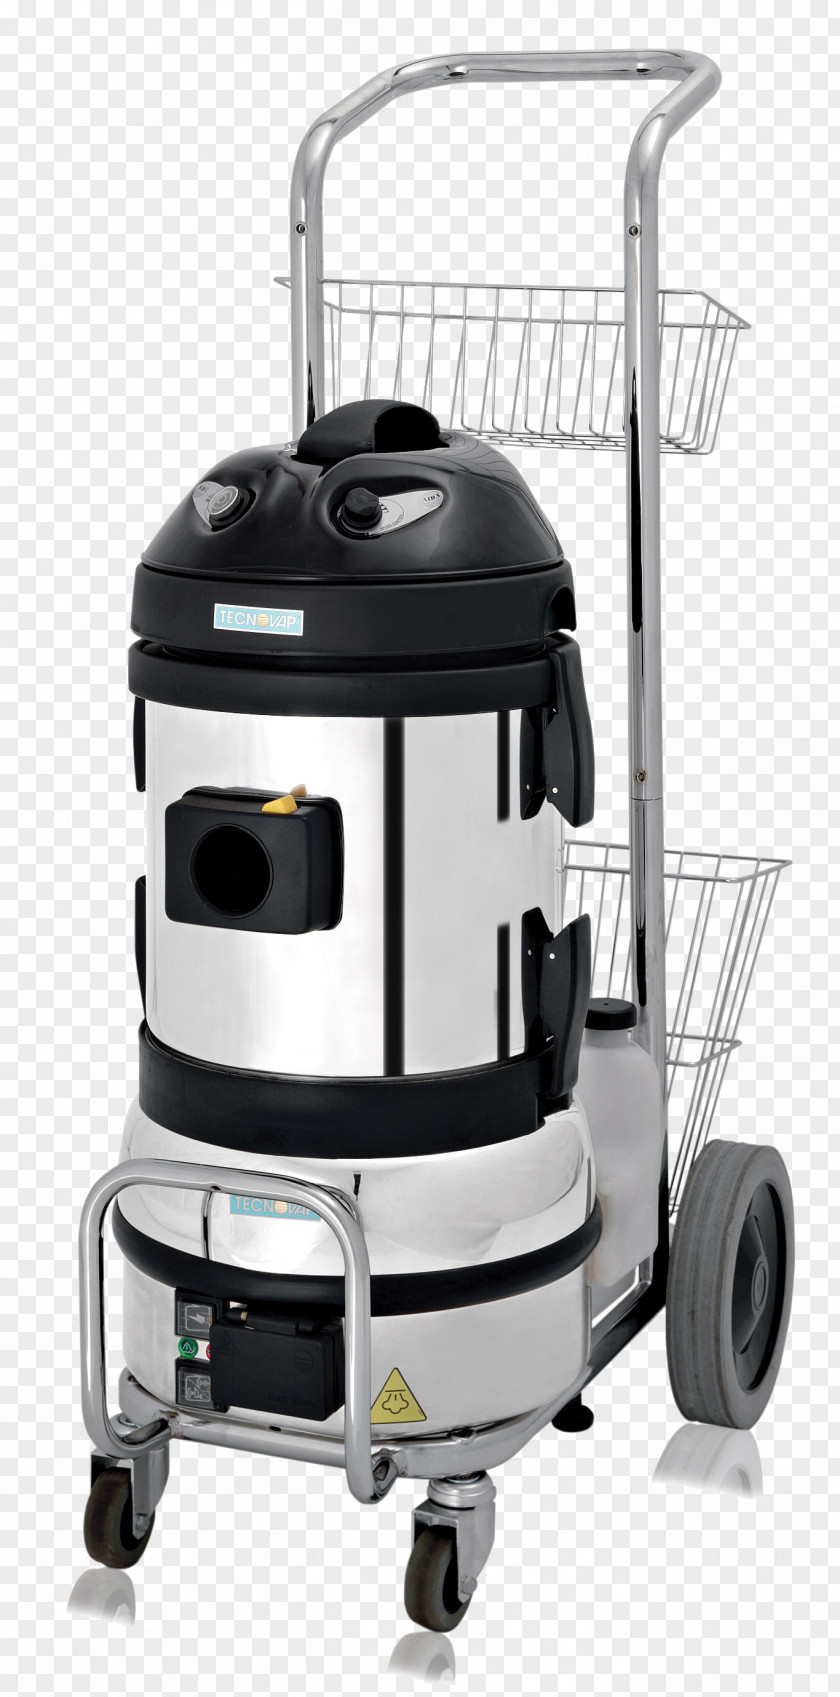 TorE Pressure Washers Steam Cleaning Vapor Cleaner Vacuum PNG